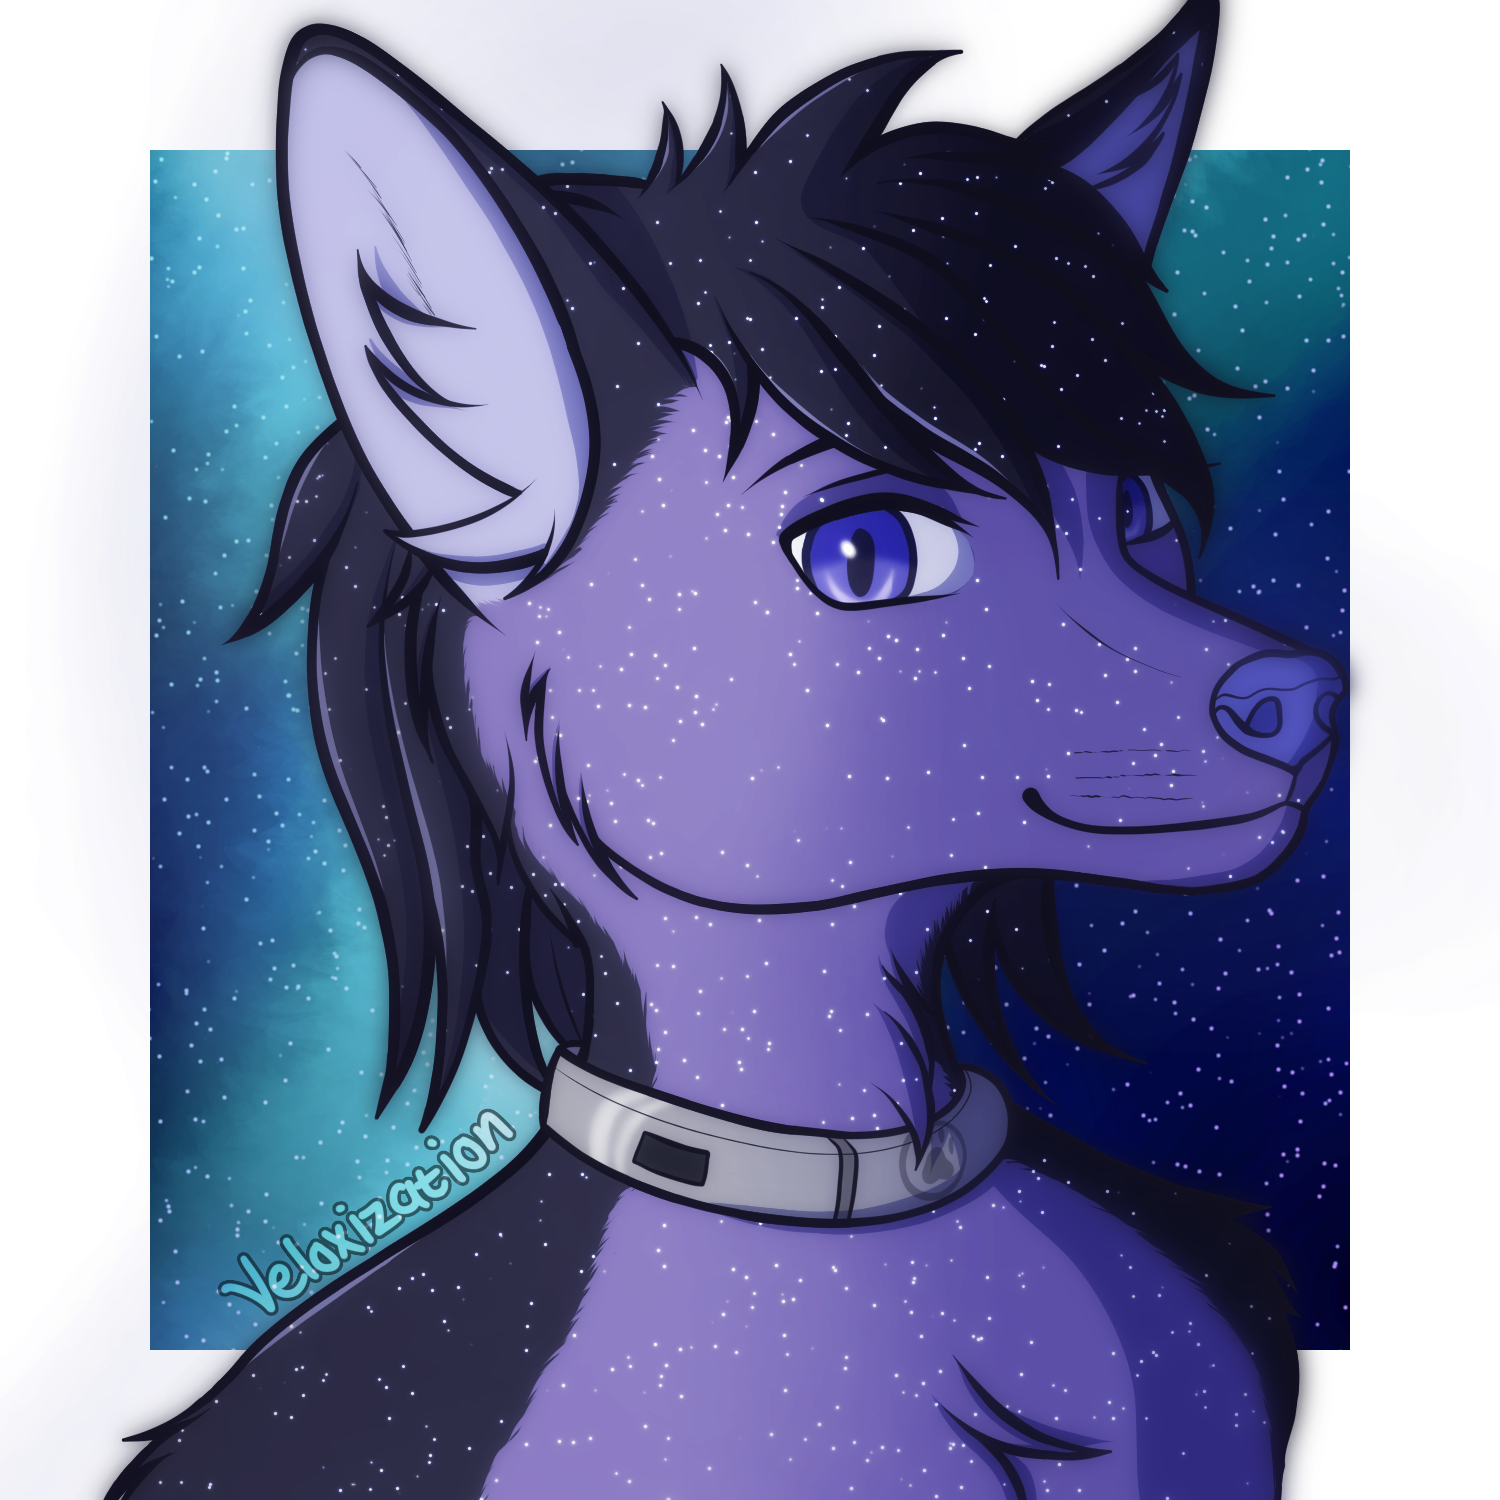 Headshot of a purple folf with a space-themed background.